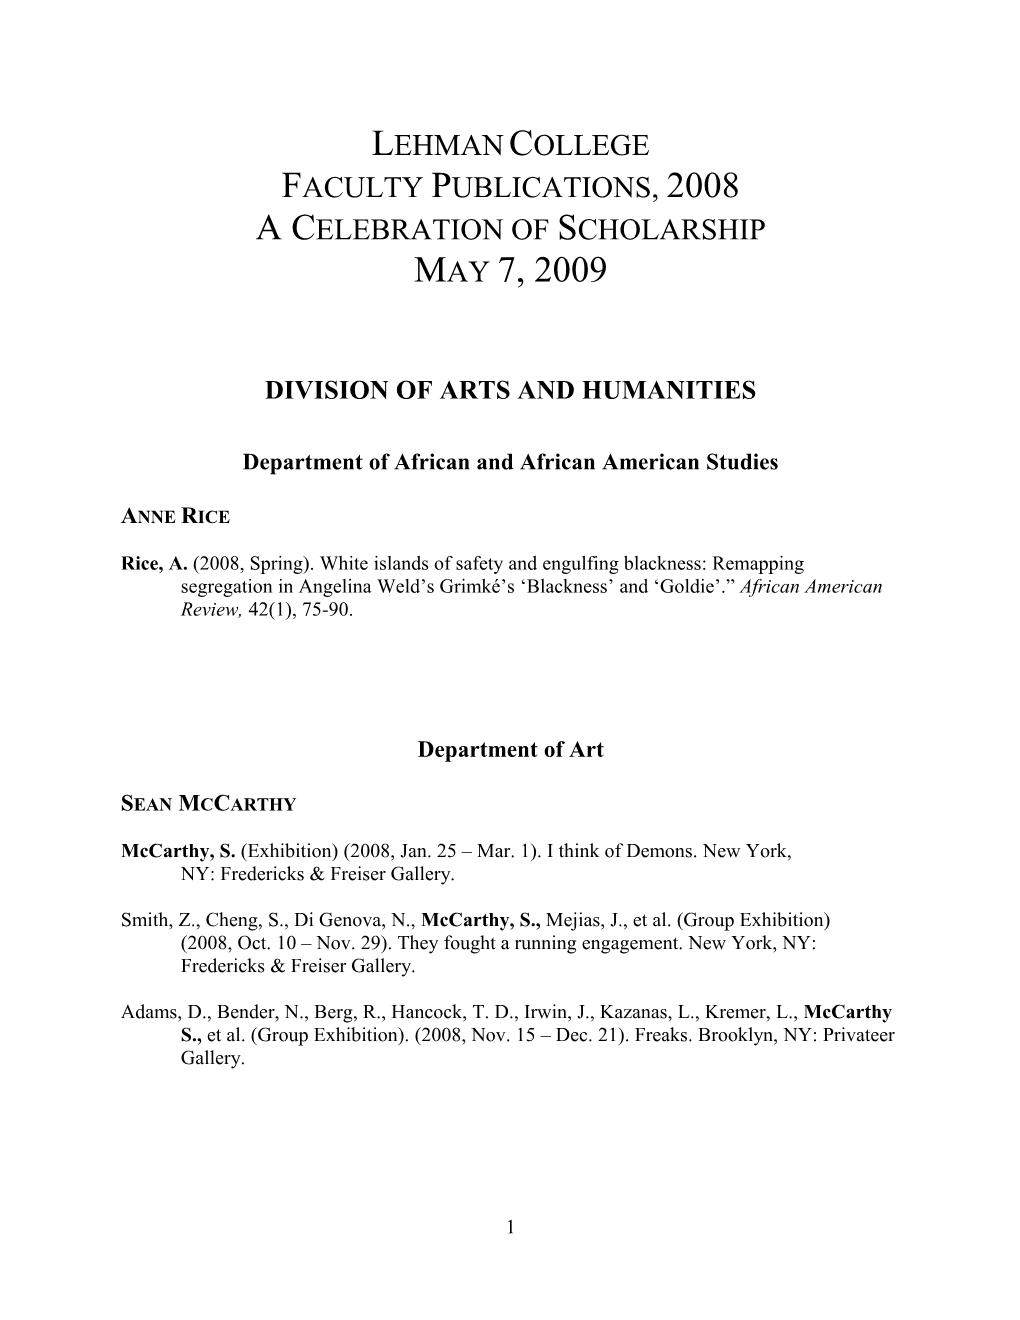 Division of Arts and Humanities